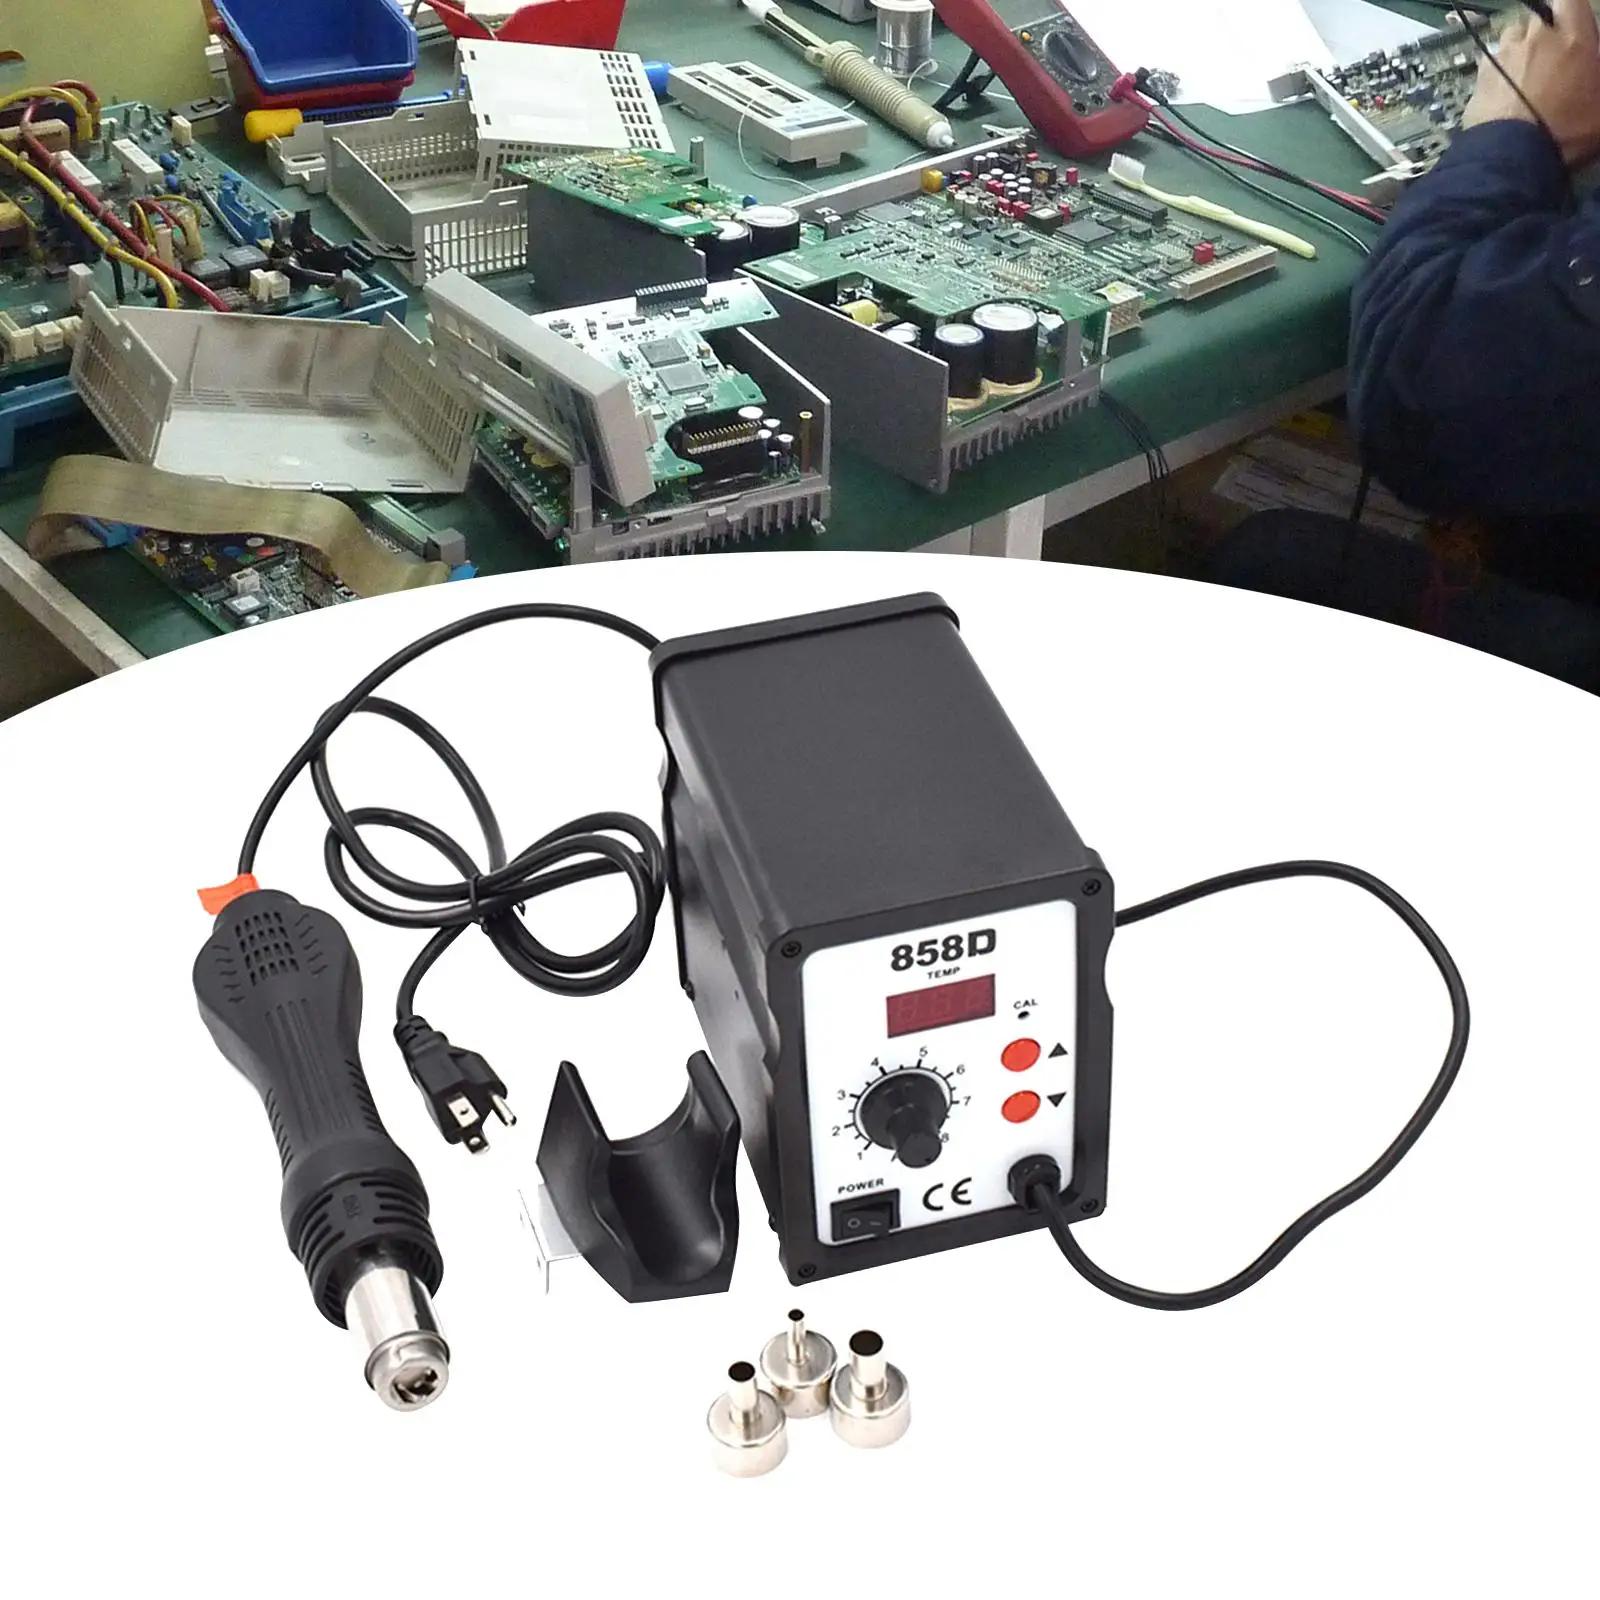 Hot Air Reflow Adjustable Soldering Replacing Nozzle Professional Adjustable 858D Hot Air reworks station for Circuit Boards